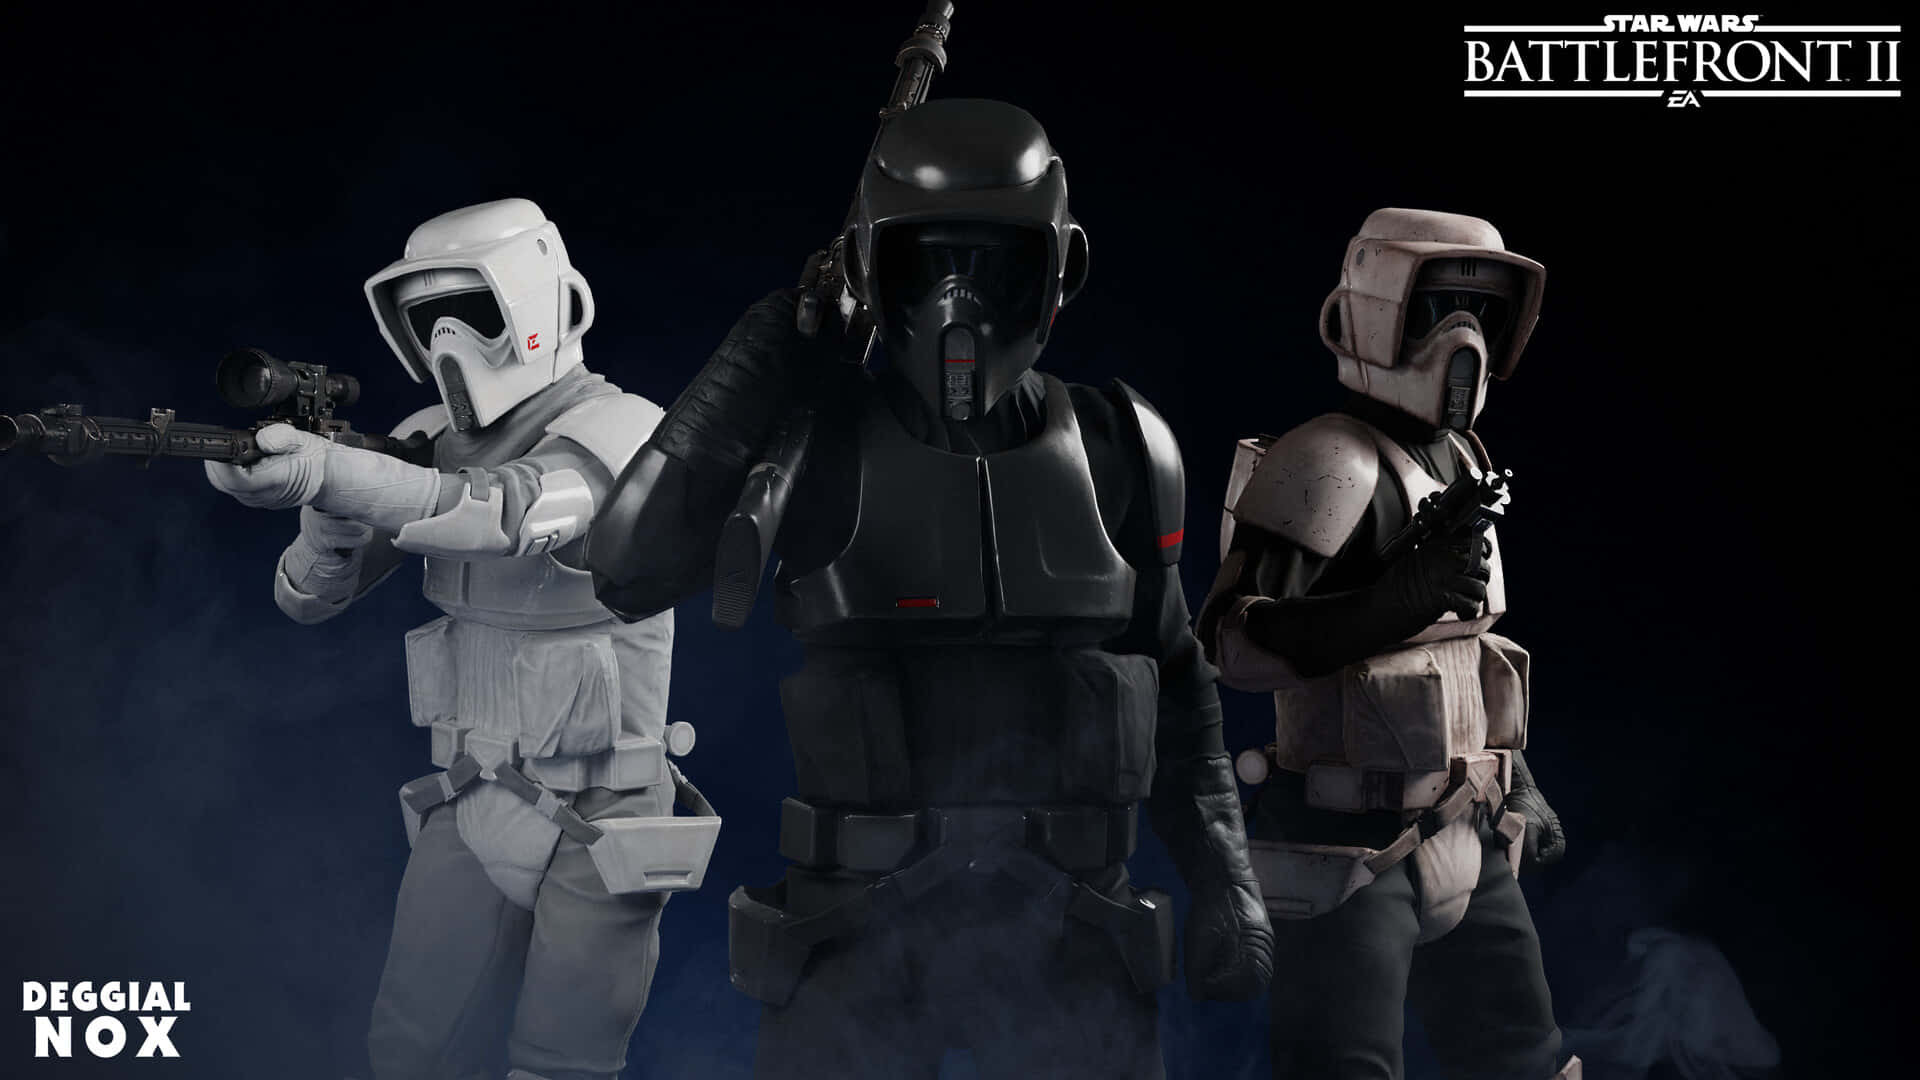 The Imperial Army Standing Strong Wallpaper